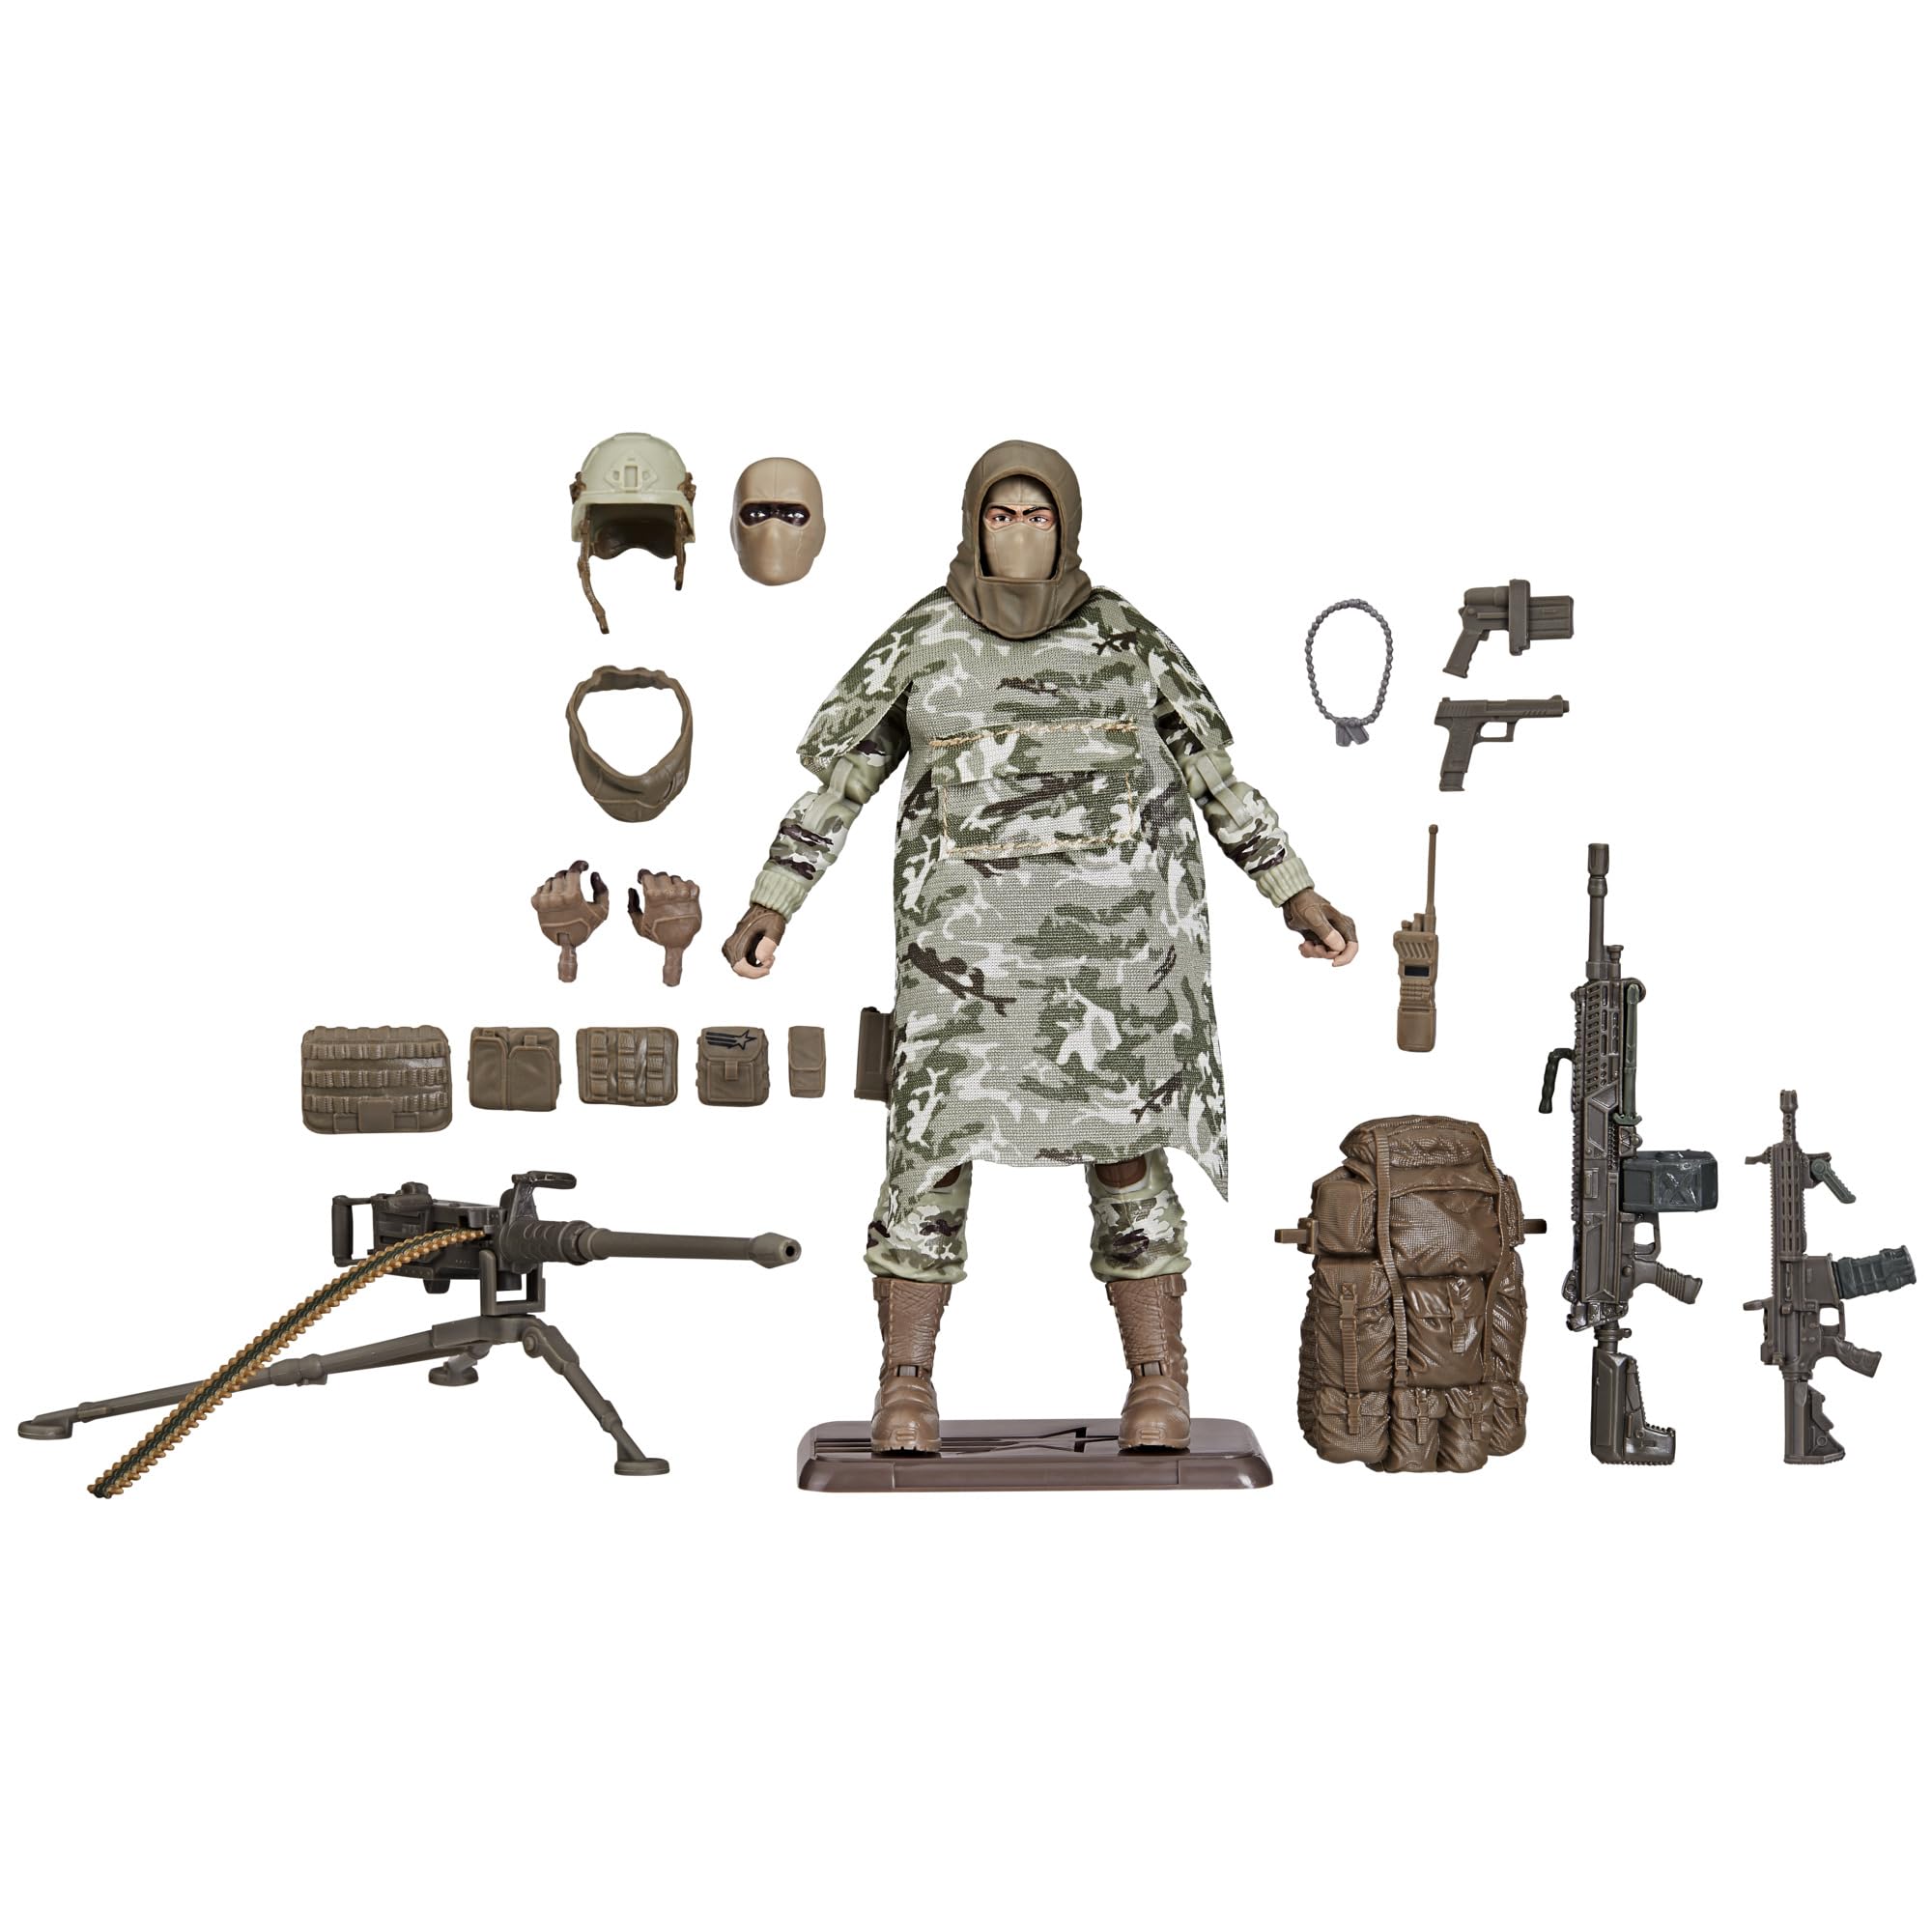 G.I. Joe Classified Series 60th Anniversary Action Soldier - Infantry, Collectible 6-Inch Action Figure with 25 Accessories